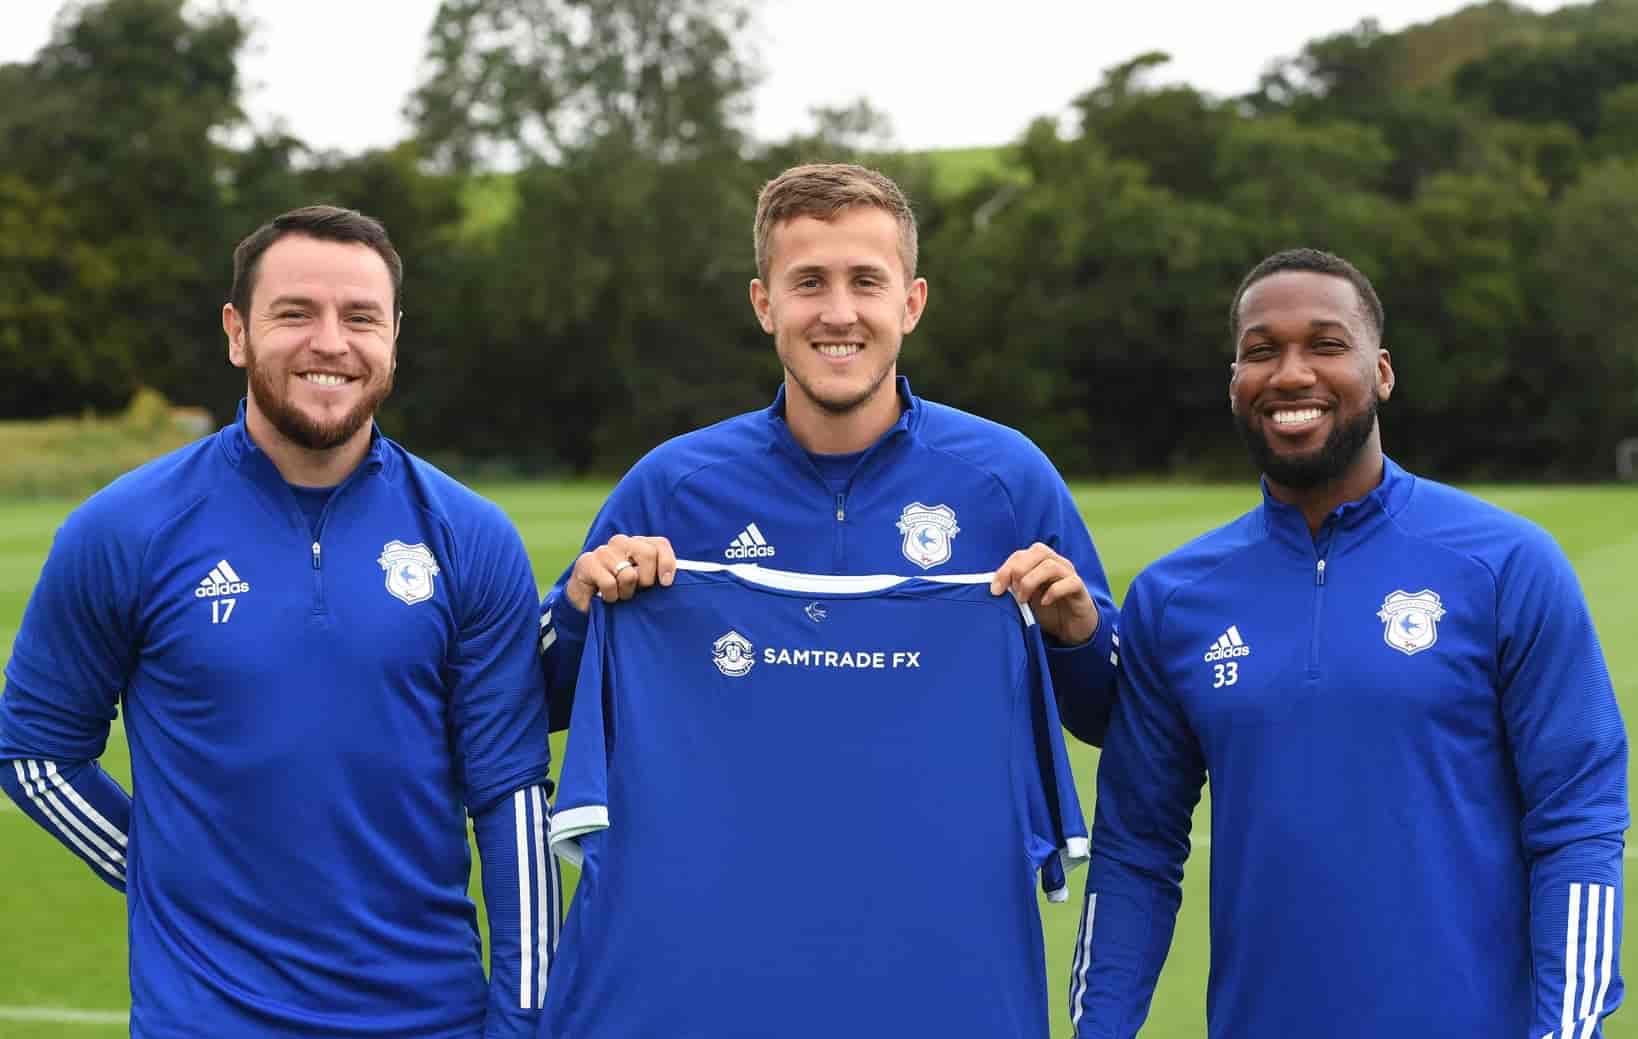 SAMTRADE FX SIGNS SPONSORSHIP DEAL WITH EFL TEAM CARDIFF CITY FC